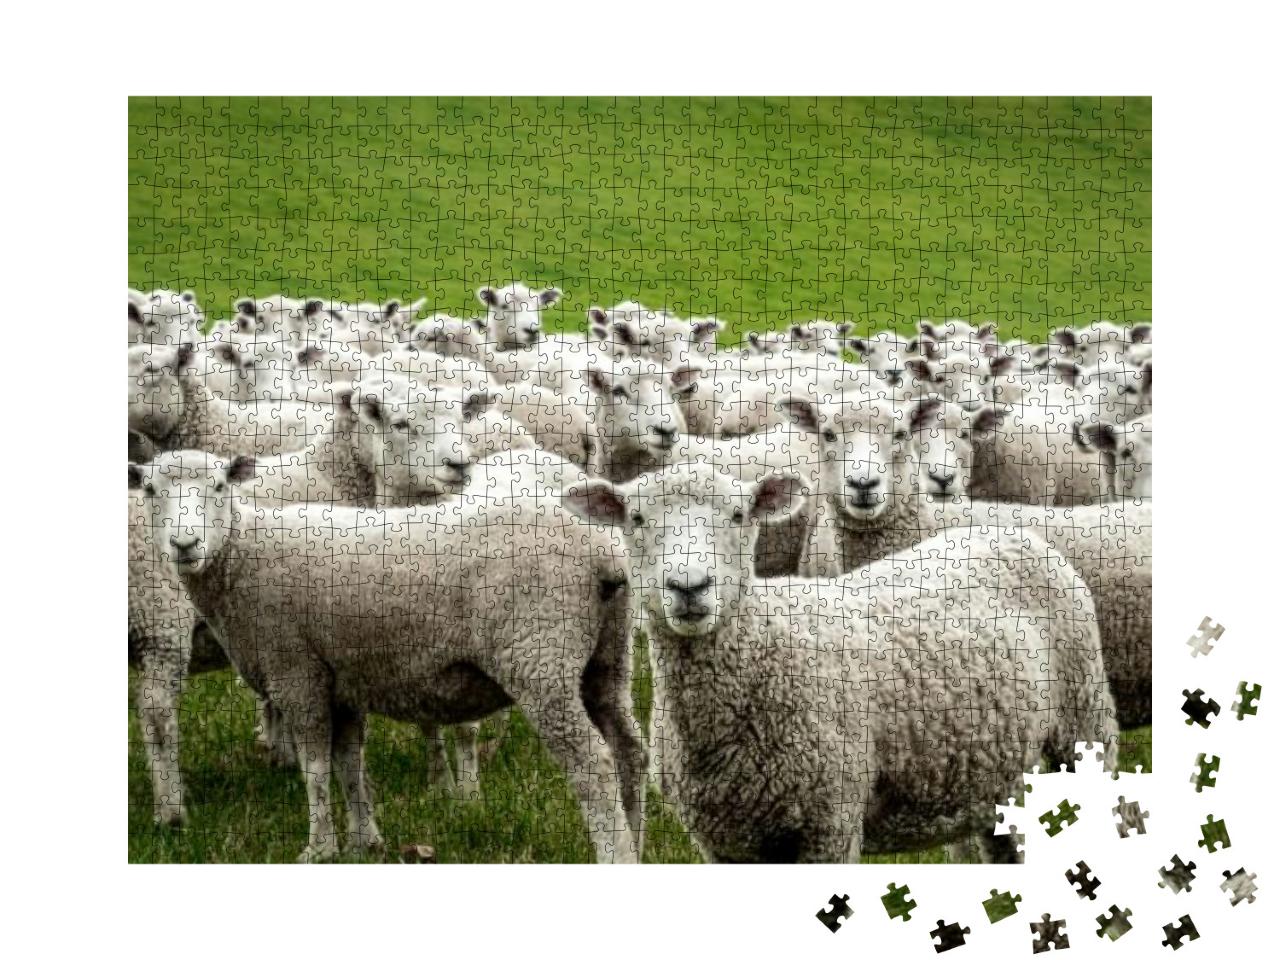 Flock of Staring Sheep... Jigsaw Puzzle with 1000 pieces